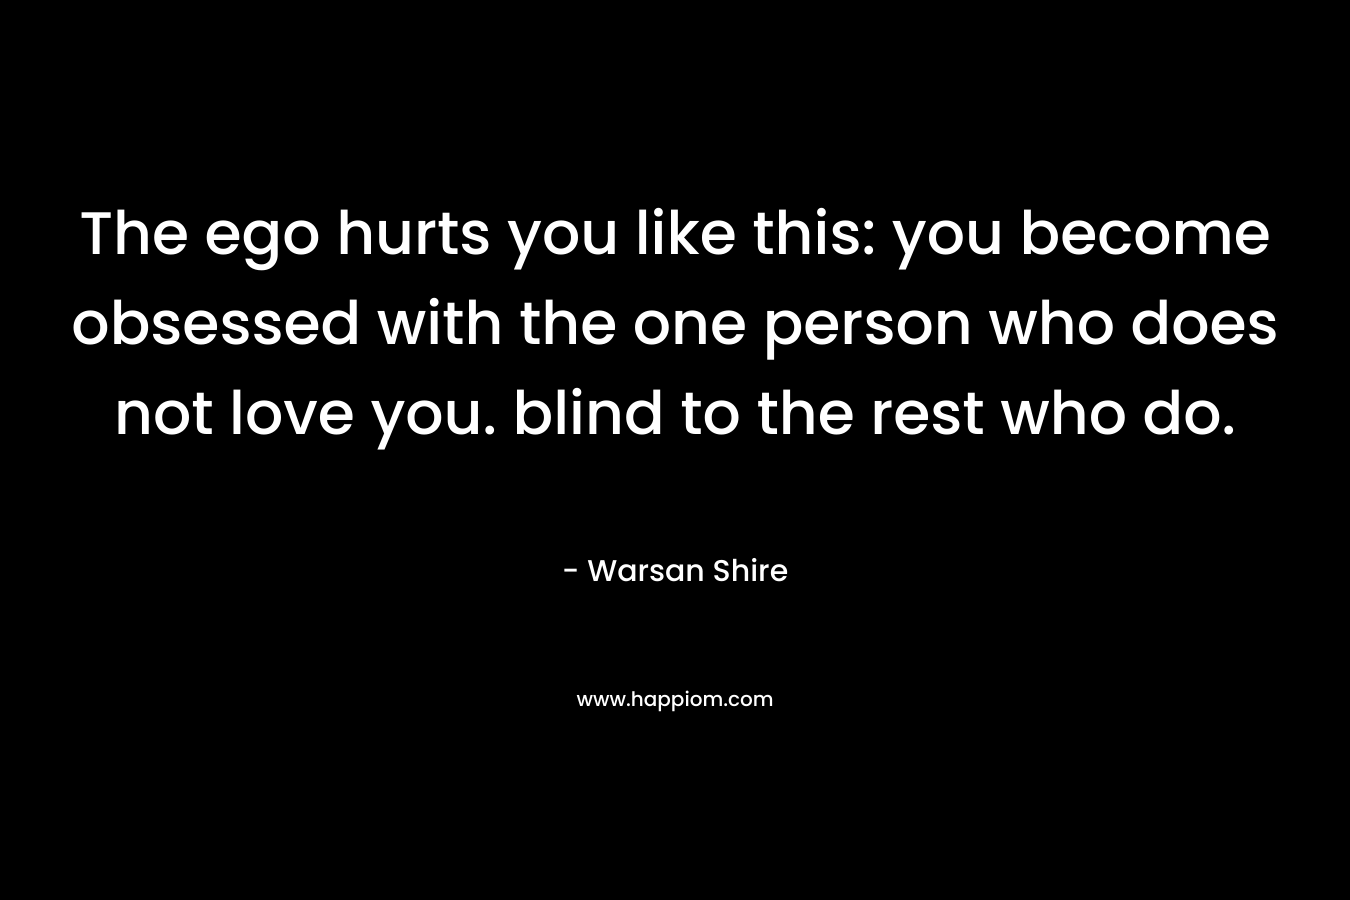 The ego hurts you like this: you become obsessed with the one person who does not love you. blind to the rest who do.